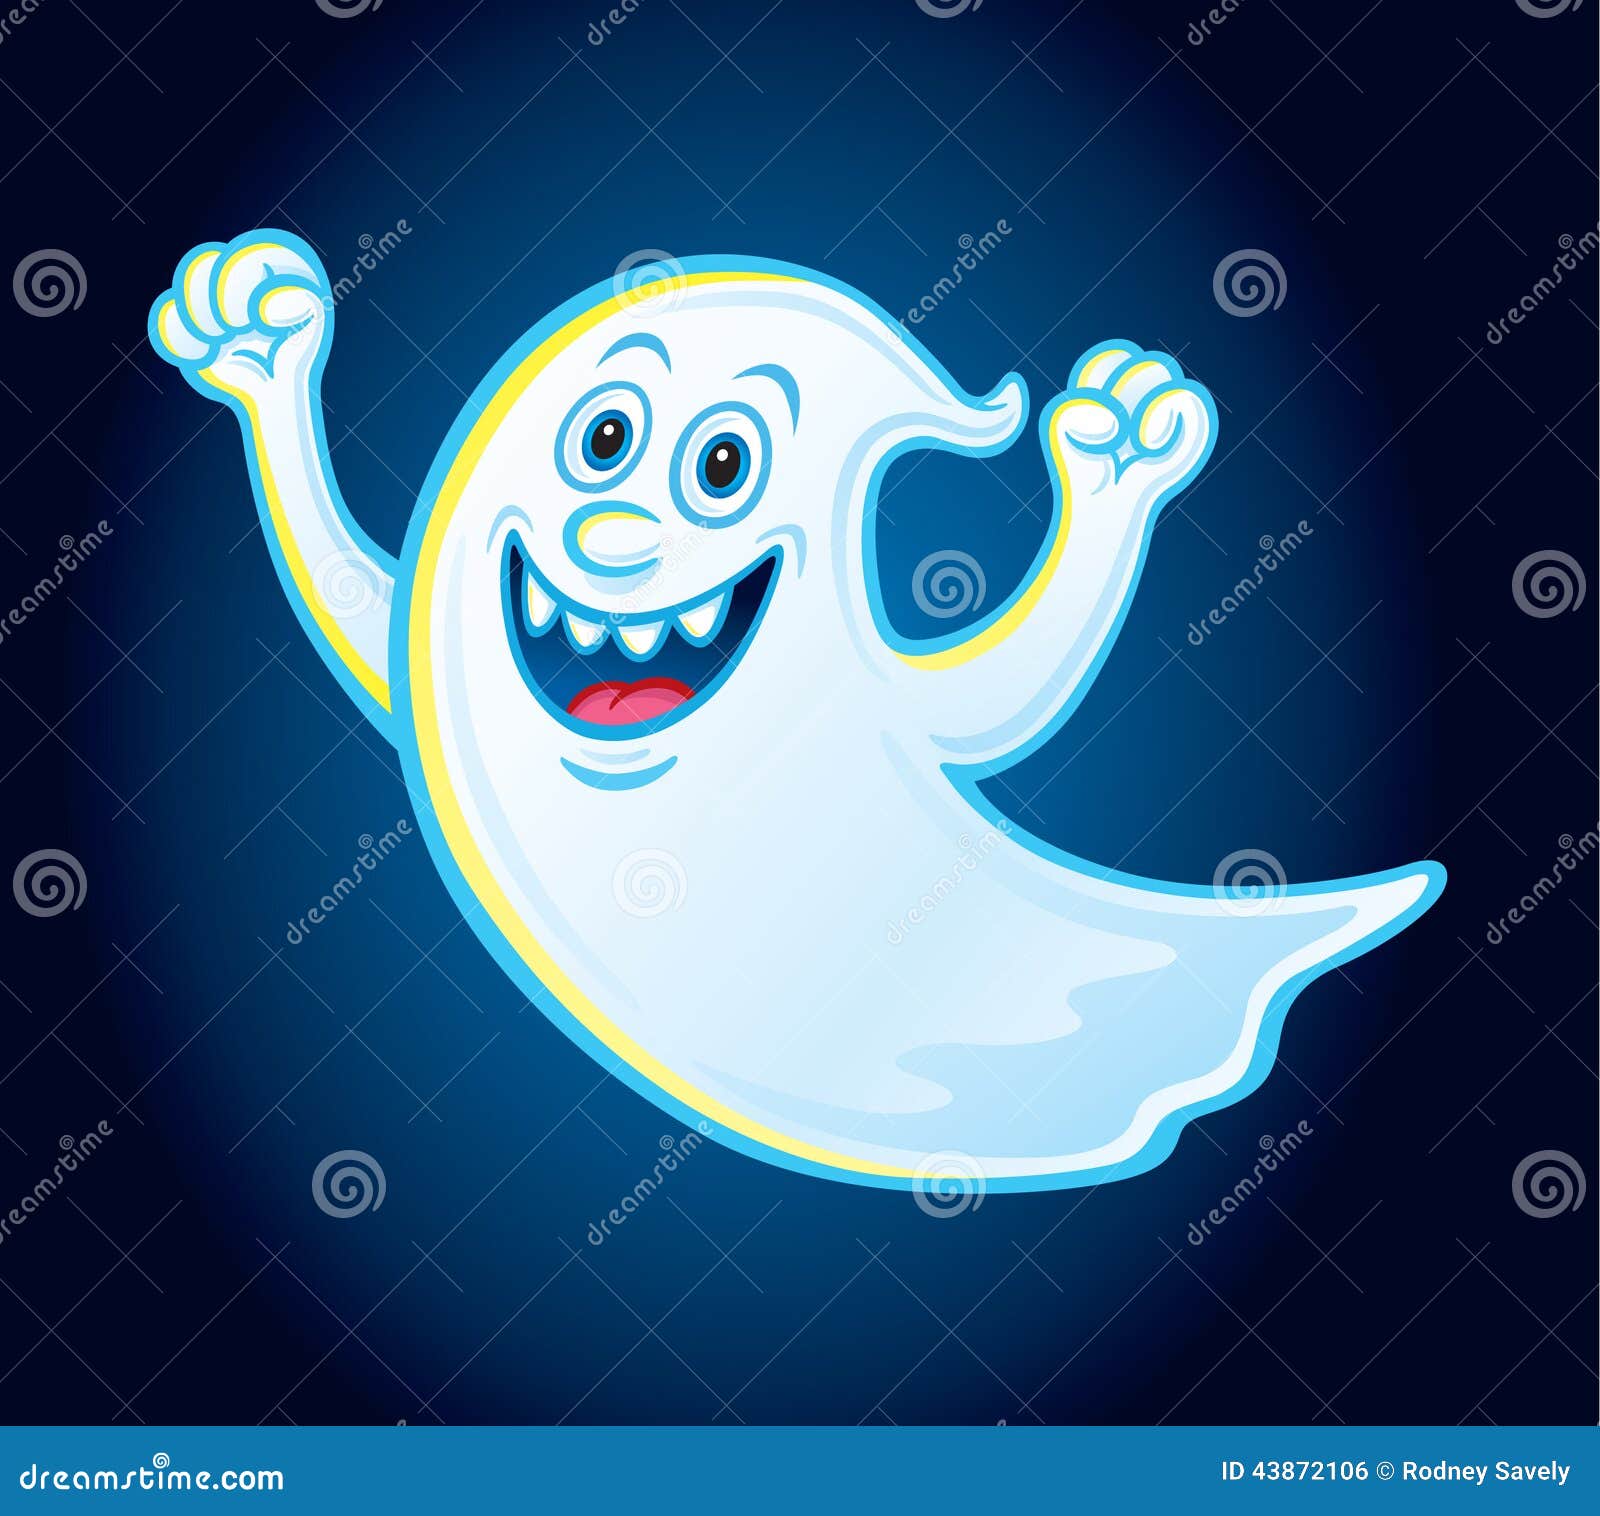 Happy Flying Ghost stock illustration. Illustration of ghostly - 43872106